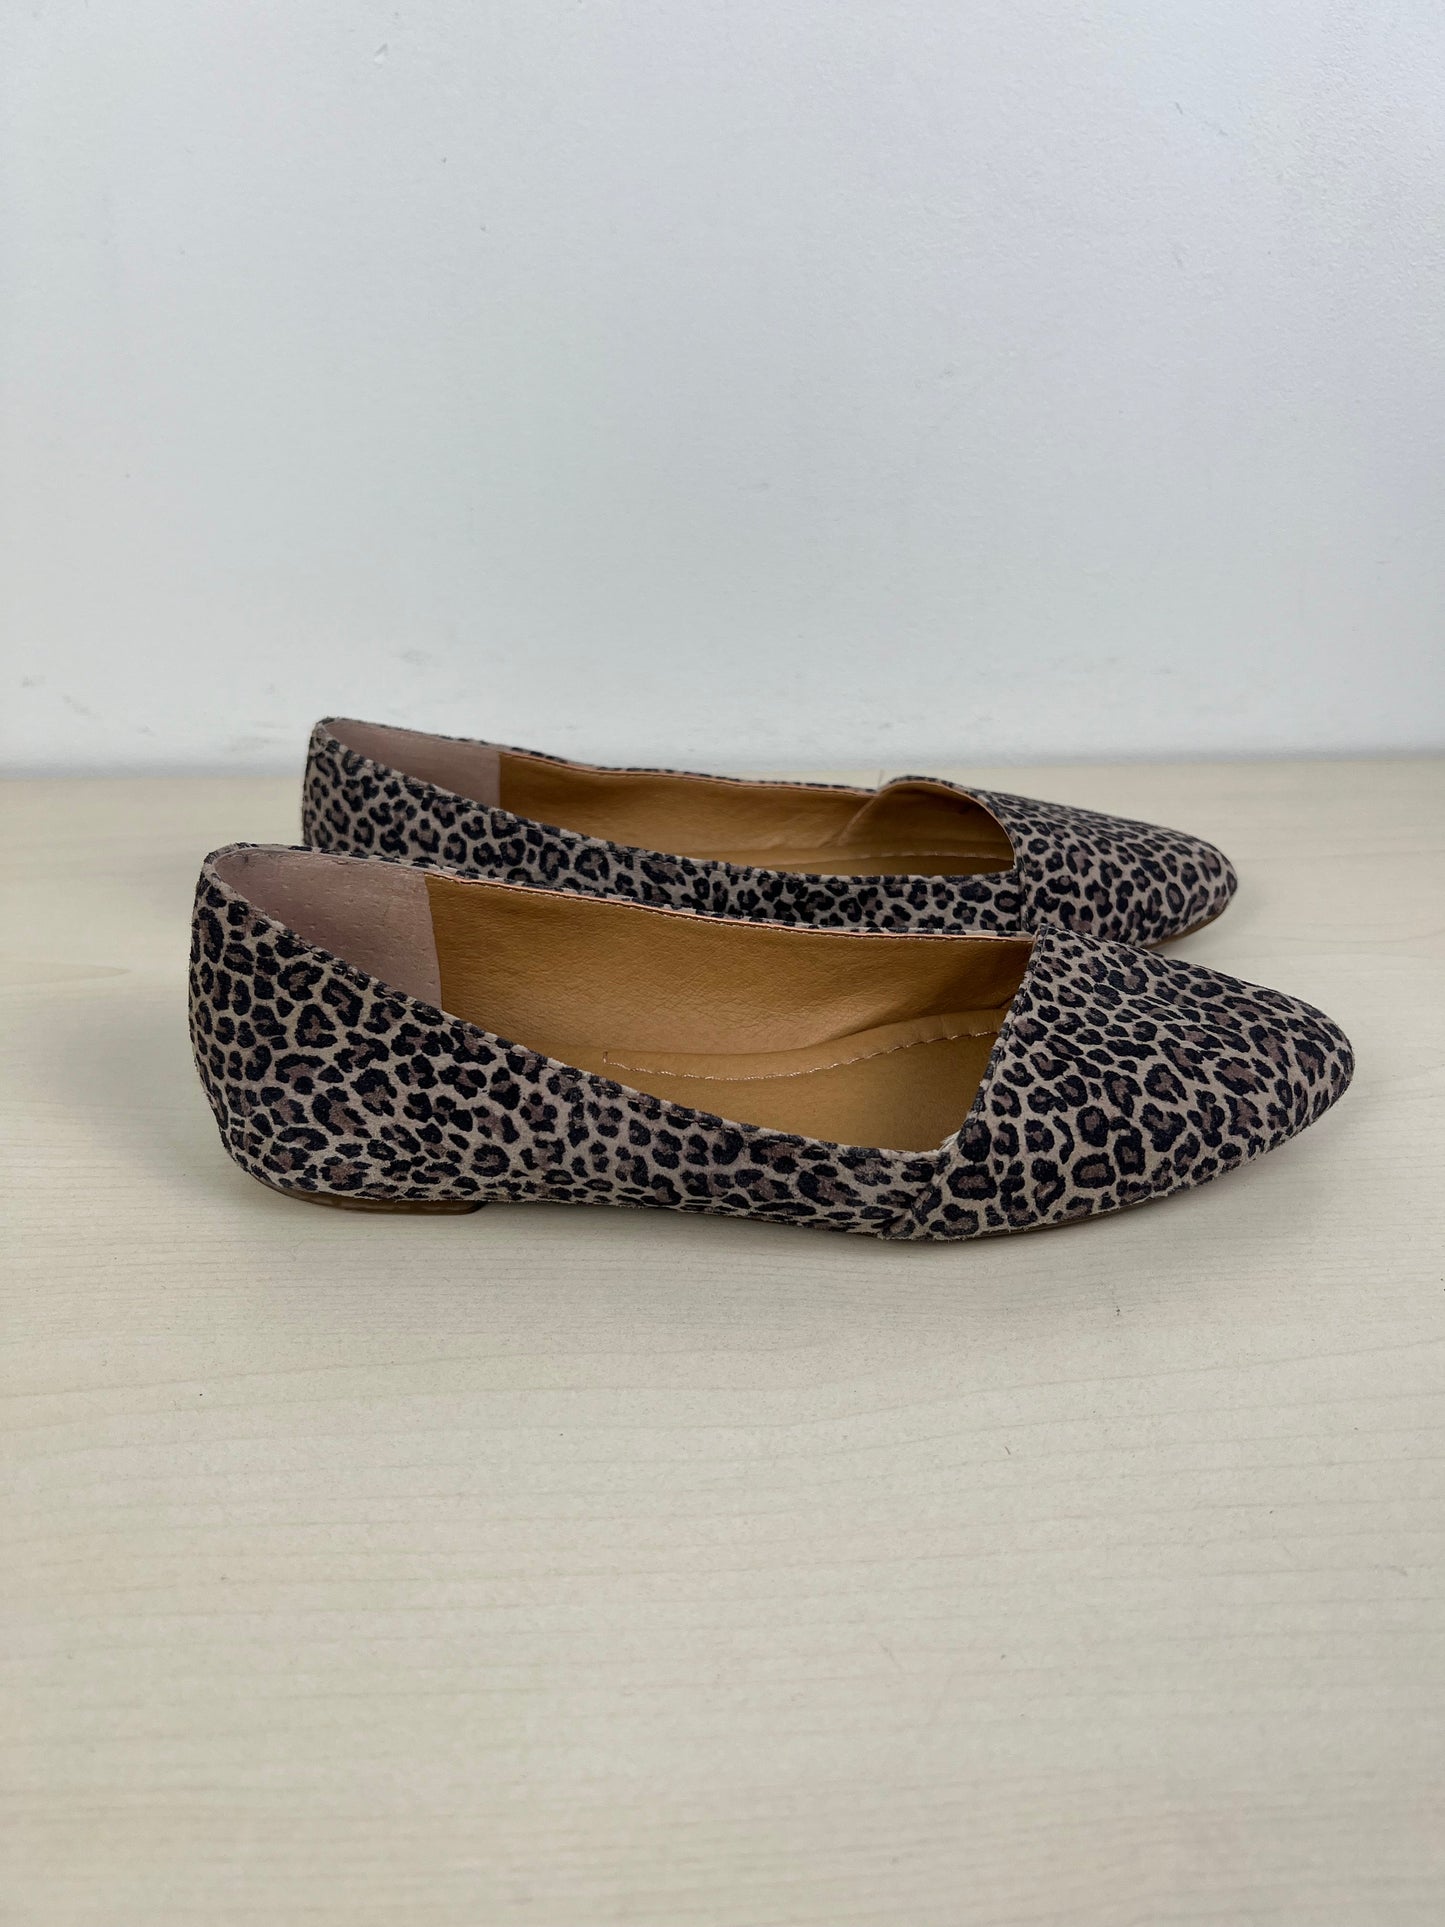 Animal Print Shoes Flats Lucky Brand, Size 6.5